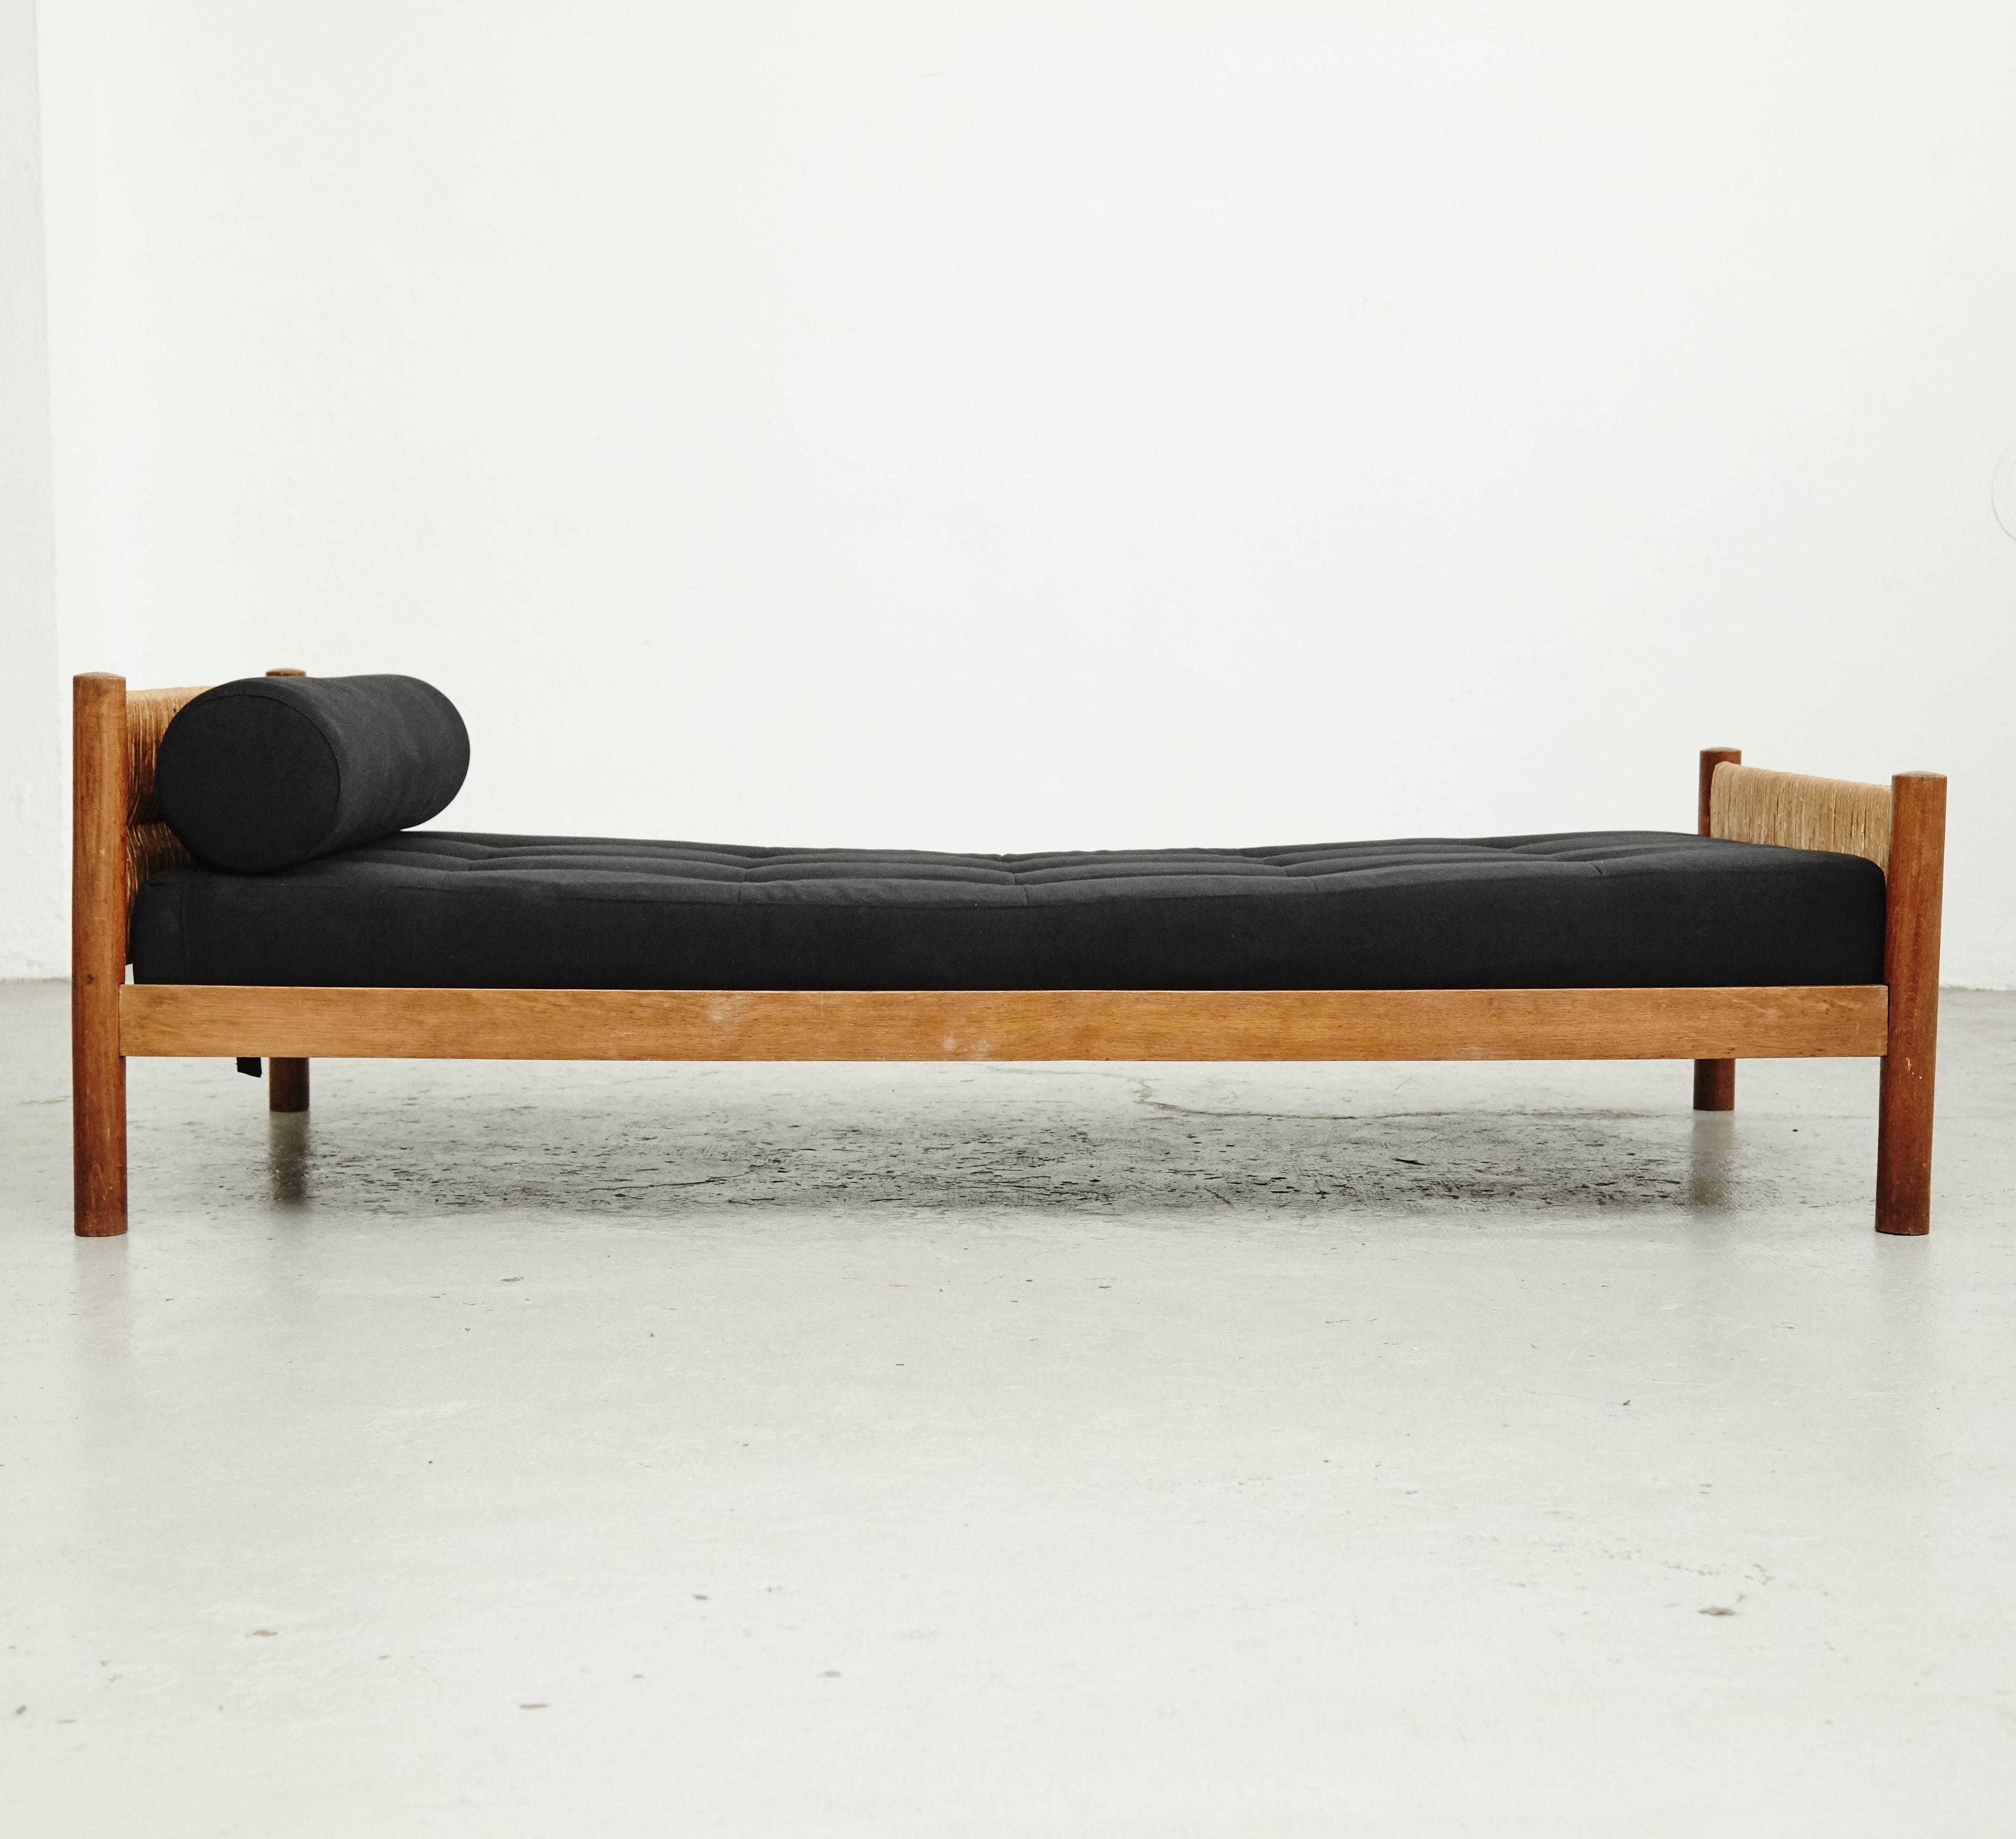 Bed model meribel, designed by Charlotte Perriand, circa 1950, manufactured in France.

Wood, rattan and new upholstery.

In good original condition, with minor wear consistent with age and use, preserving a beautiful patina.

Charlotte